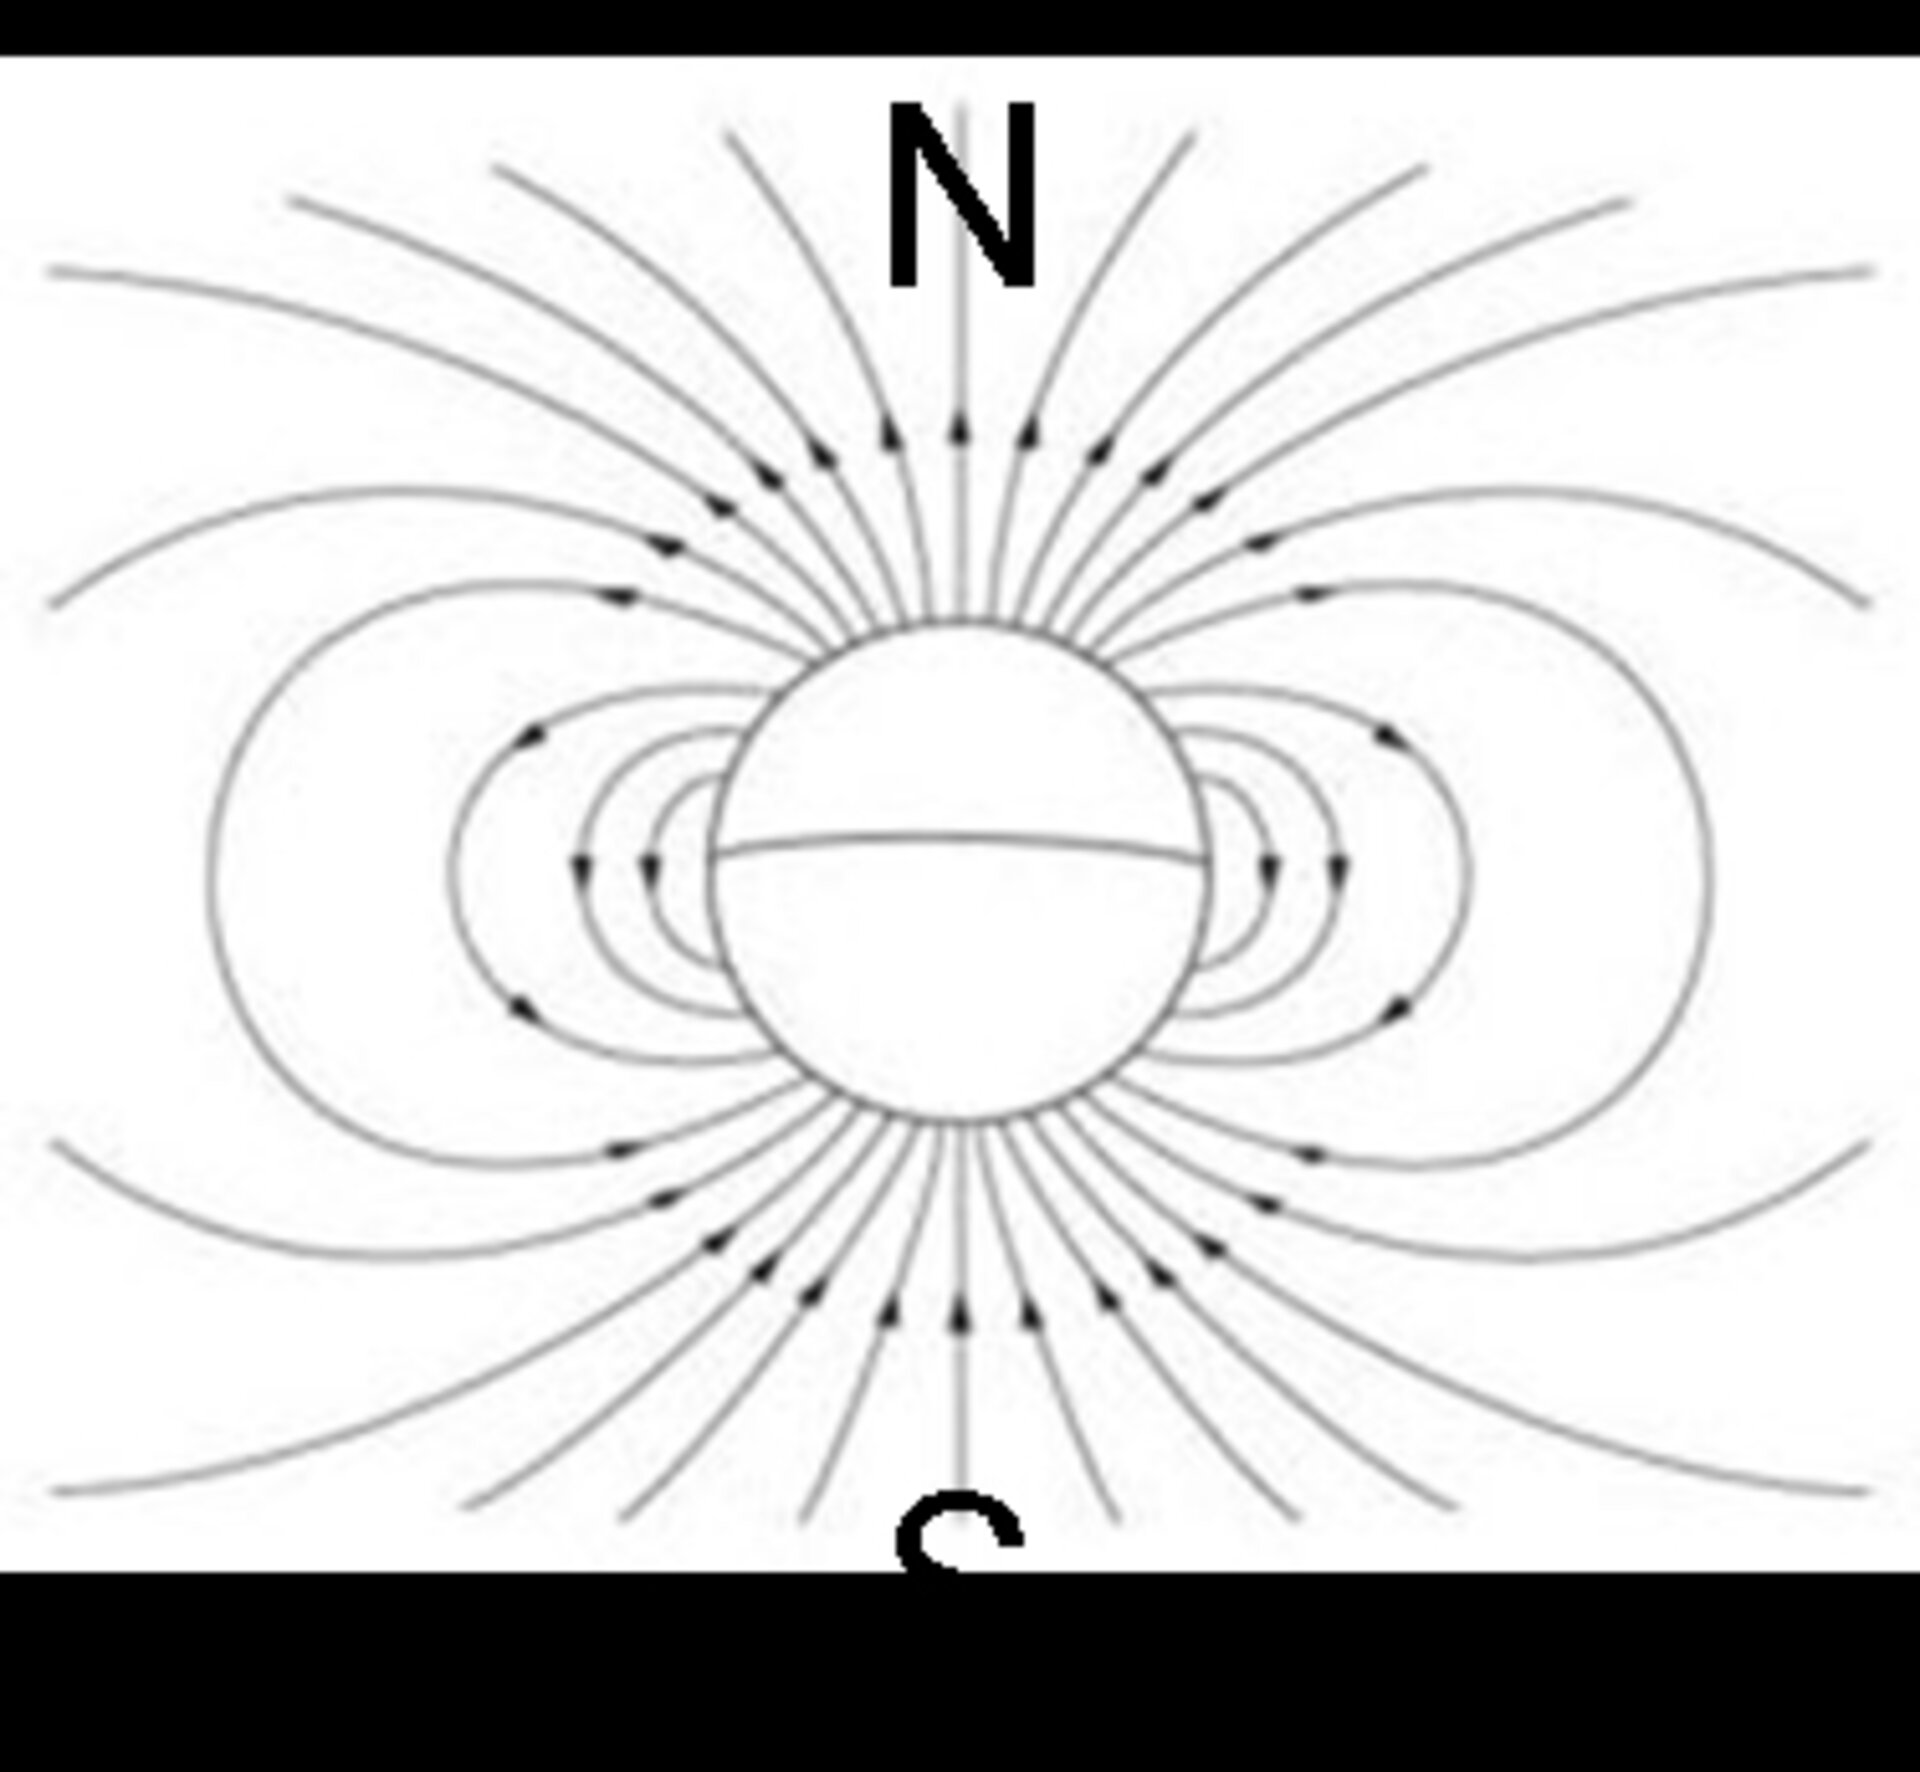 Sketch of a dipole magnetic field